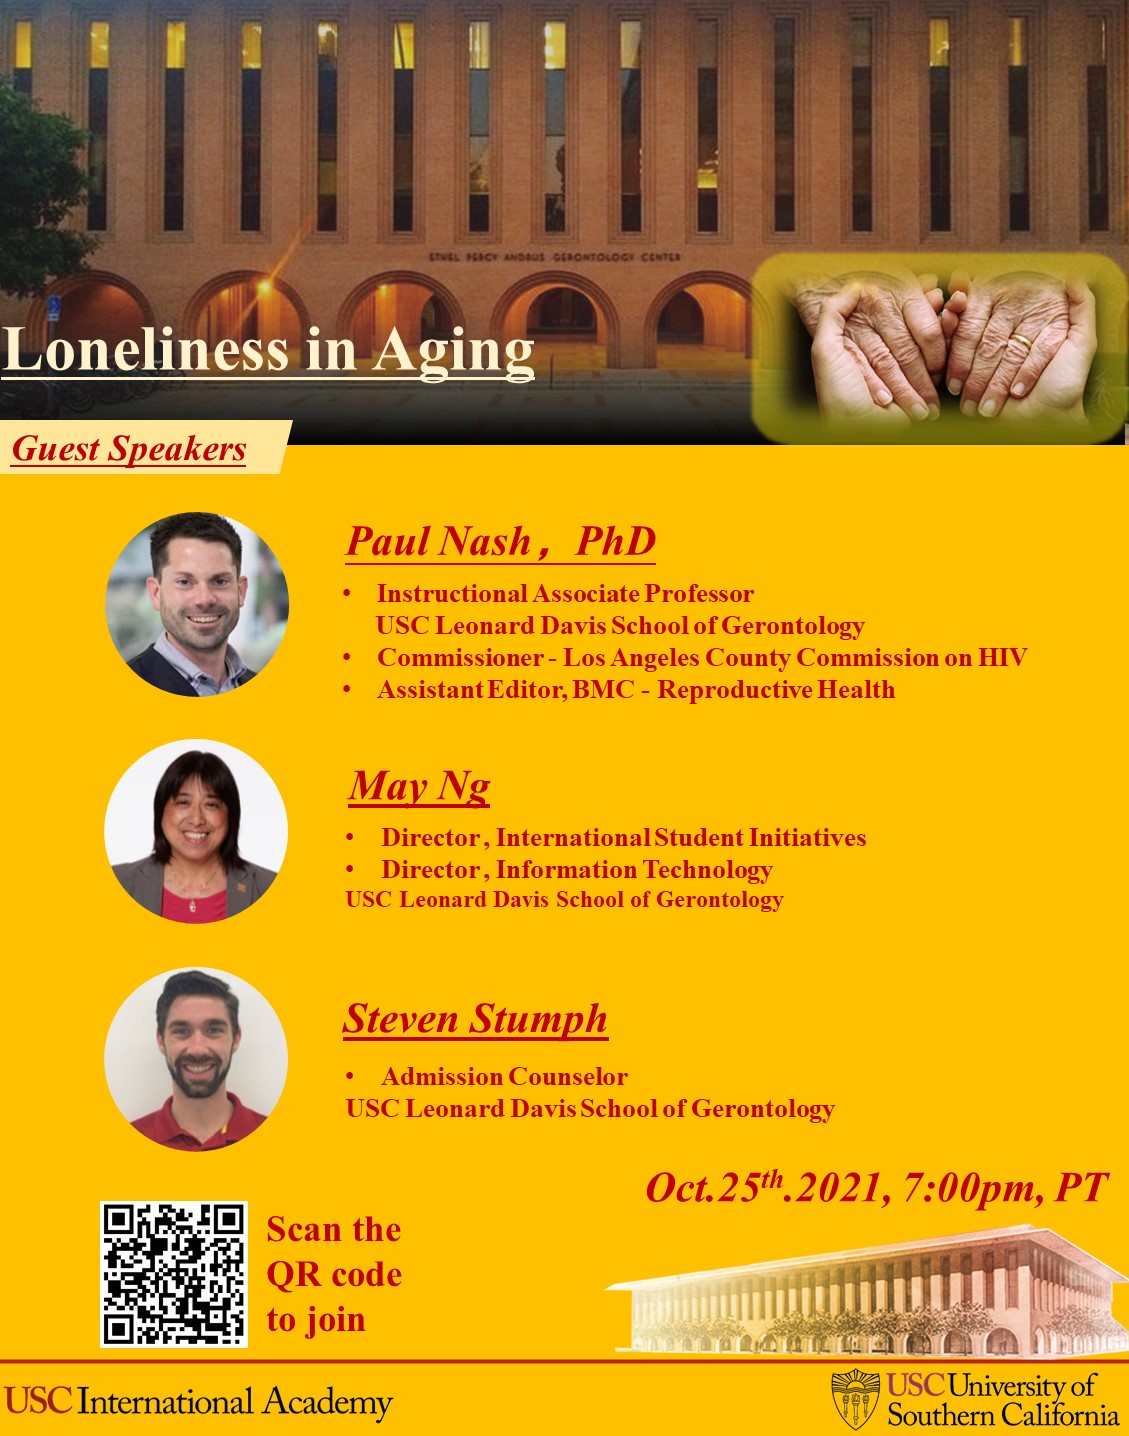 Loneliness in Aging